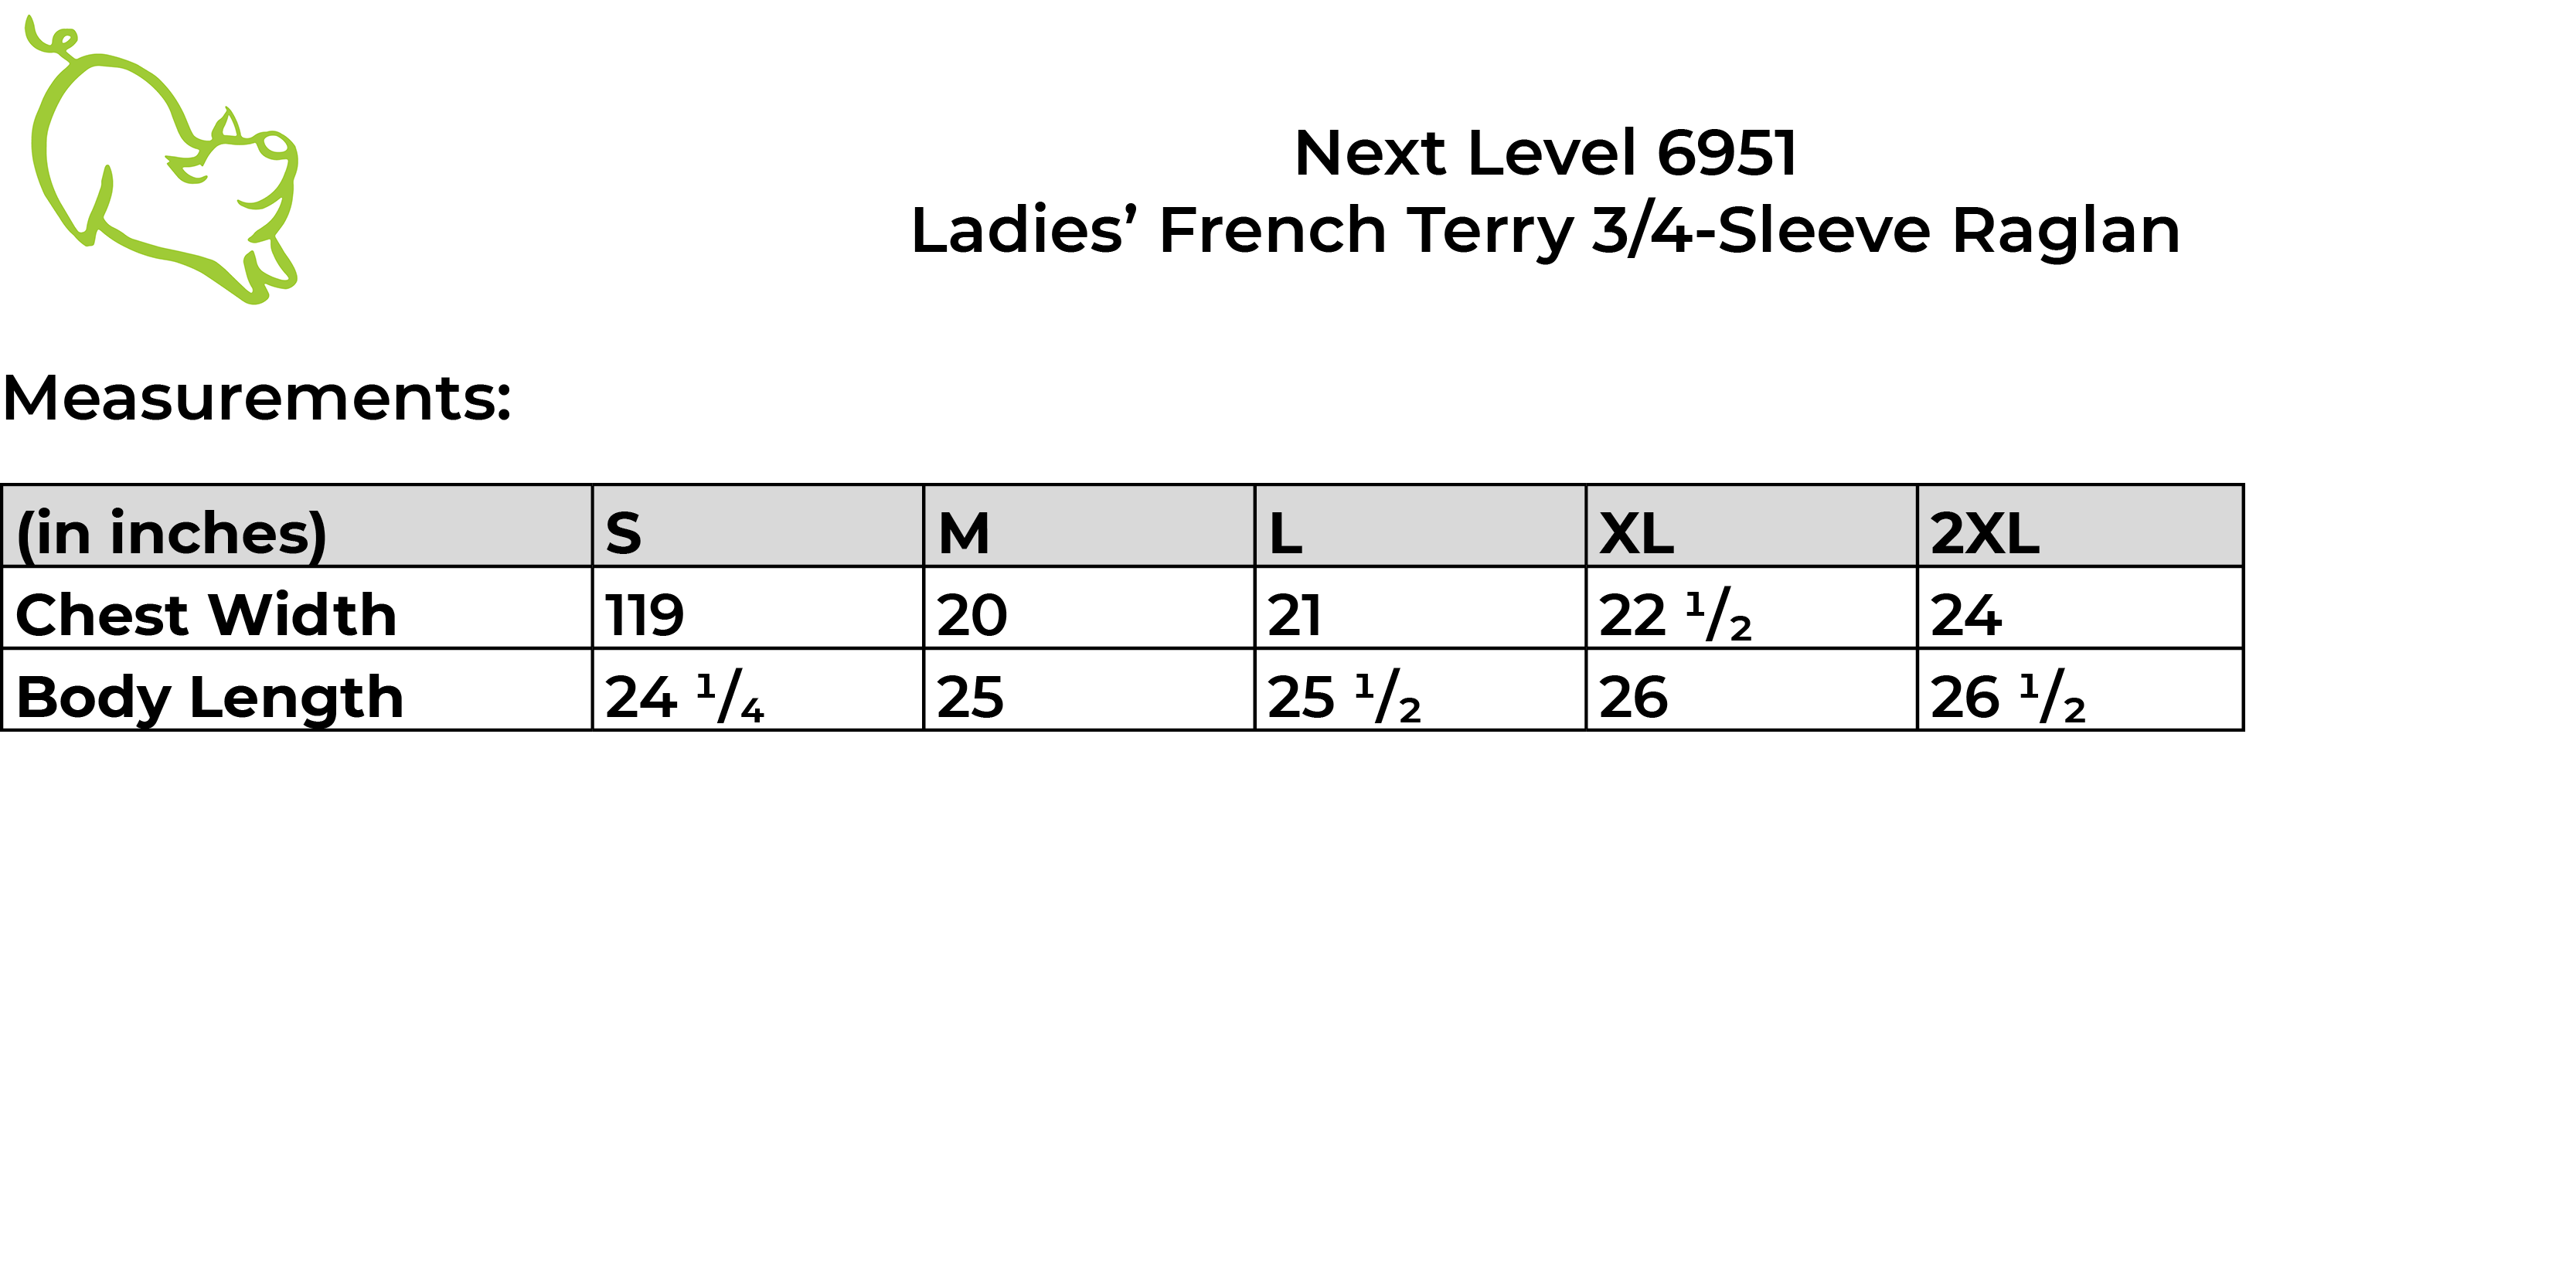 Next Level 6951 size guide